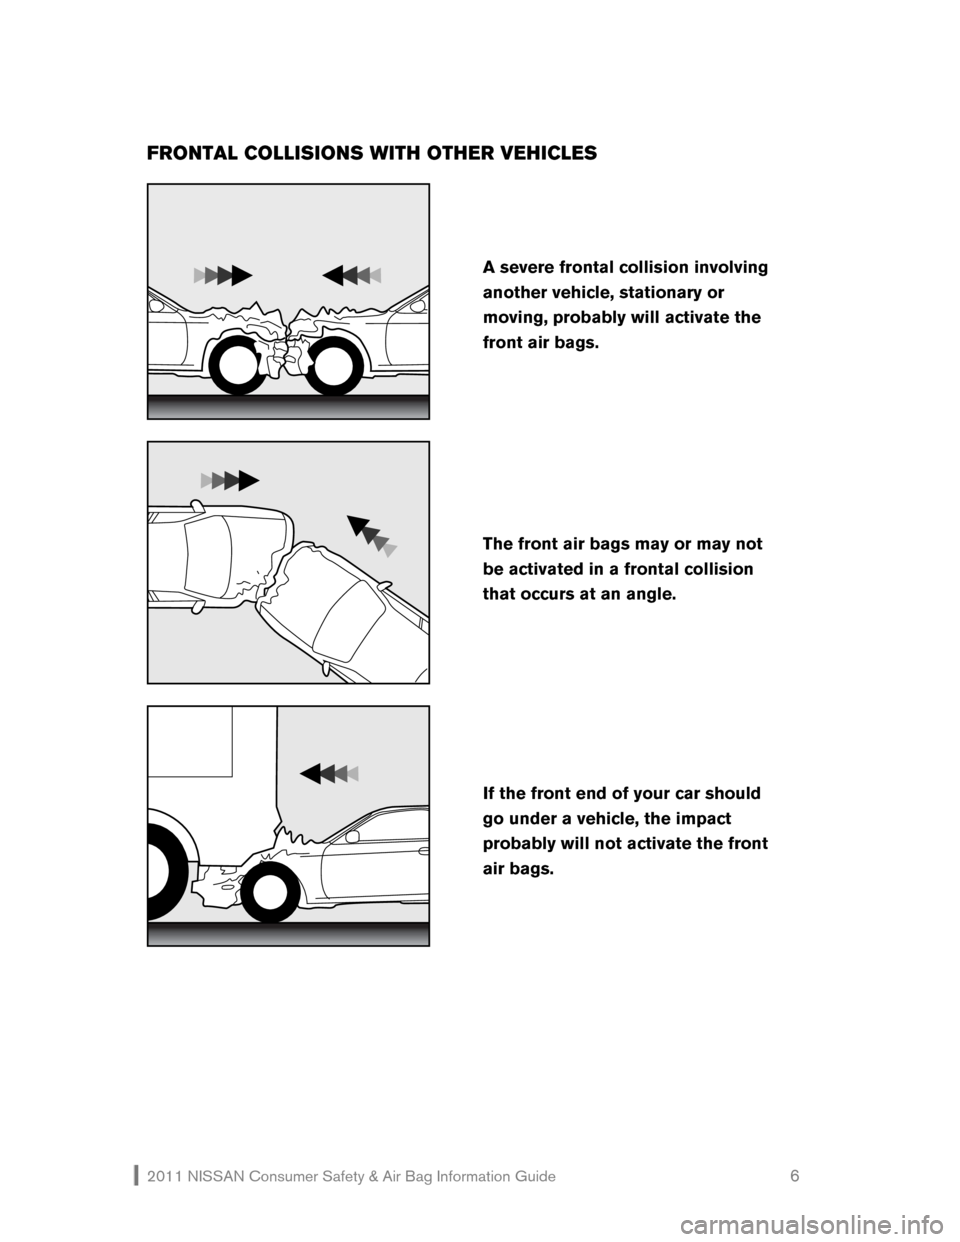 NISSAN ROGUE 2011 1.G Consumer Safety Air Bag Information Guide 2011 NISSAN Consumer Safety & Air Bag Information Guide                                                       6 
FRONTAL COLLISIONS WITH OTHER VEHICLES 
 
 
 
 
If the front end of your car should 
go